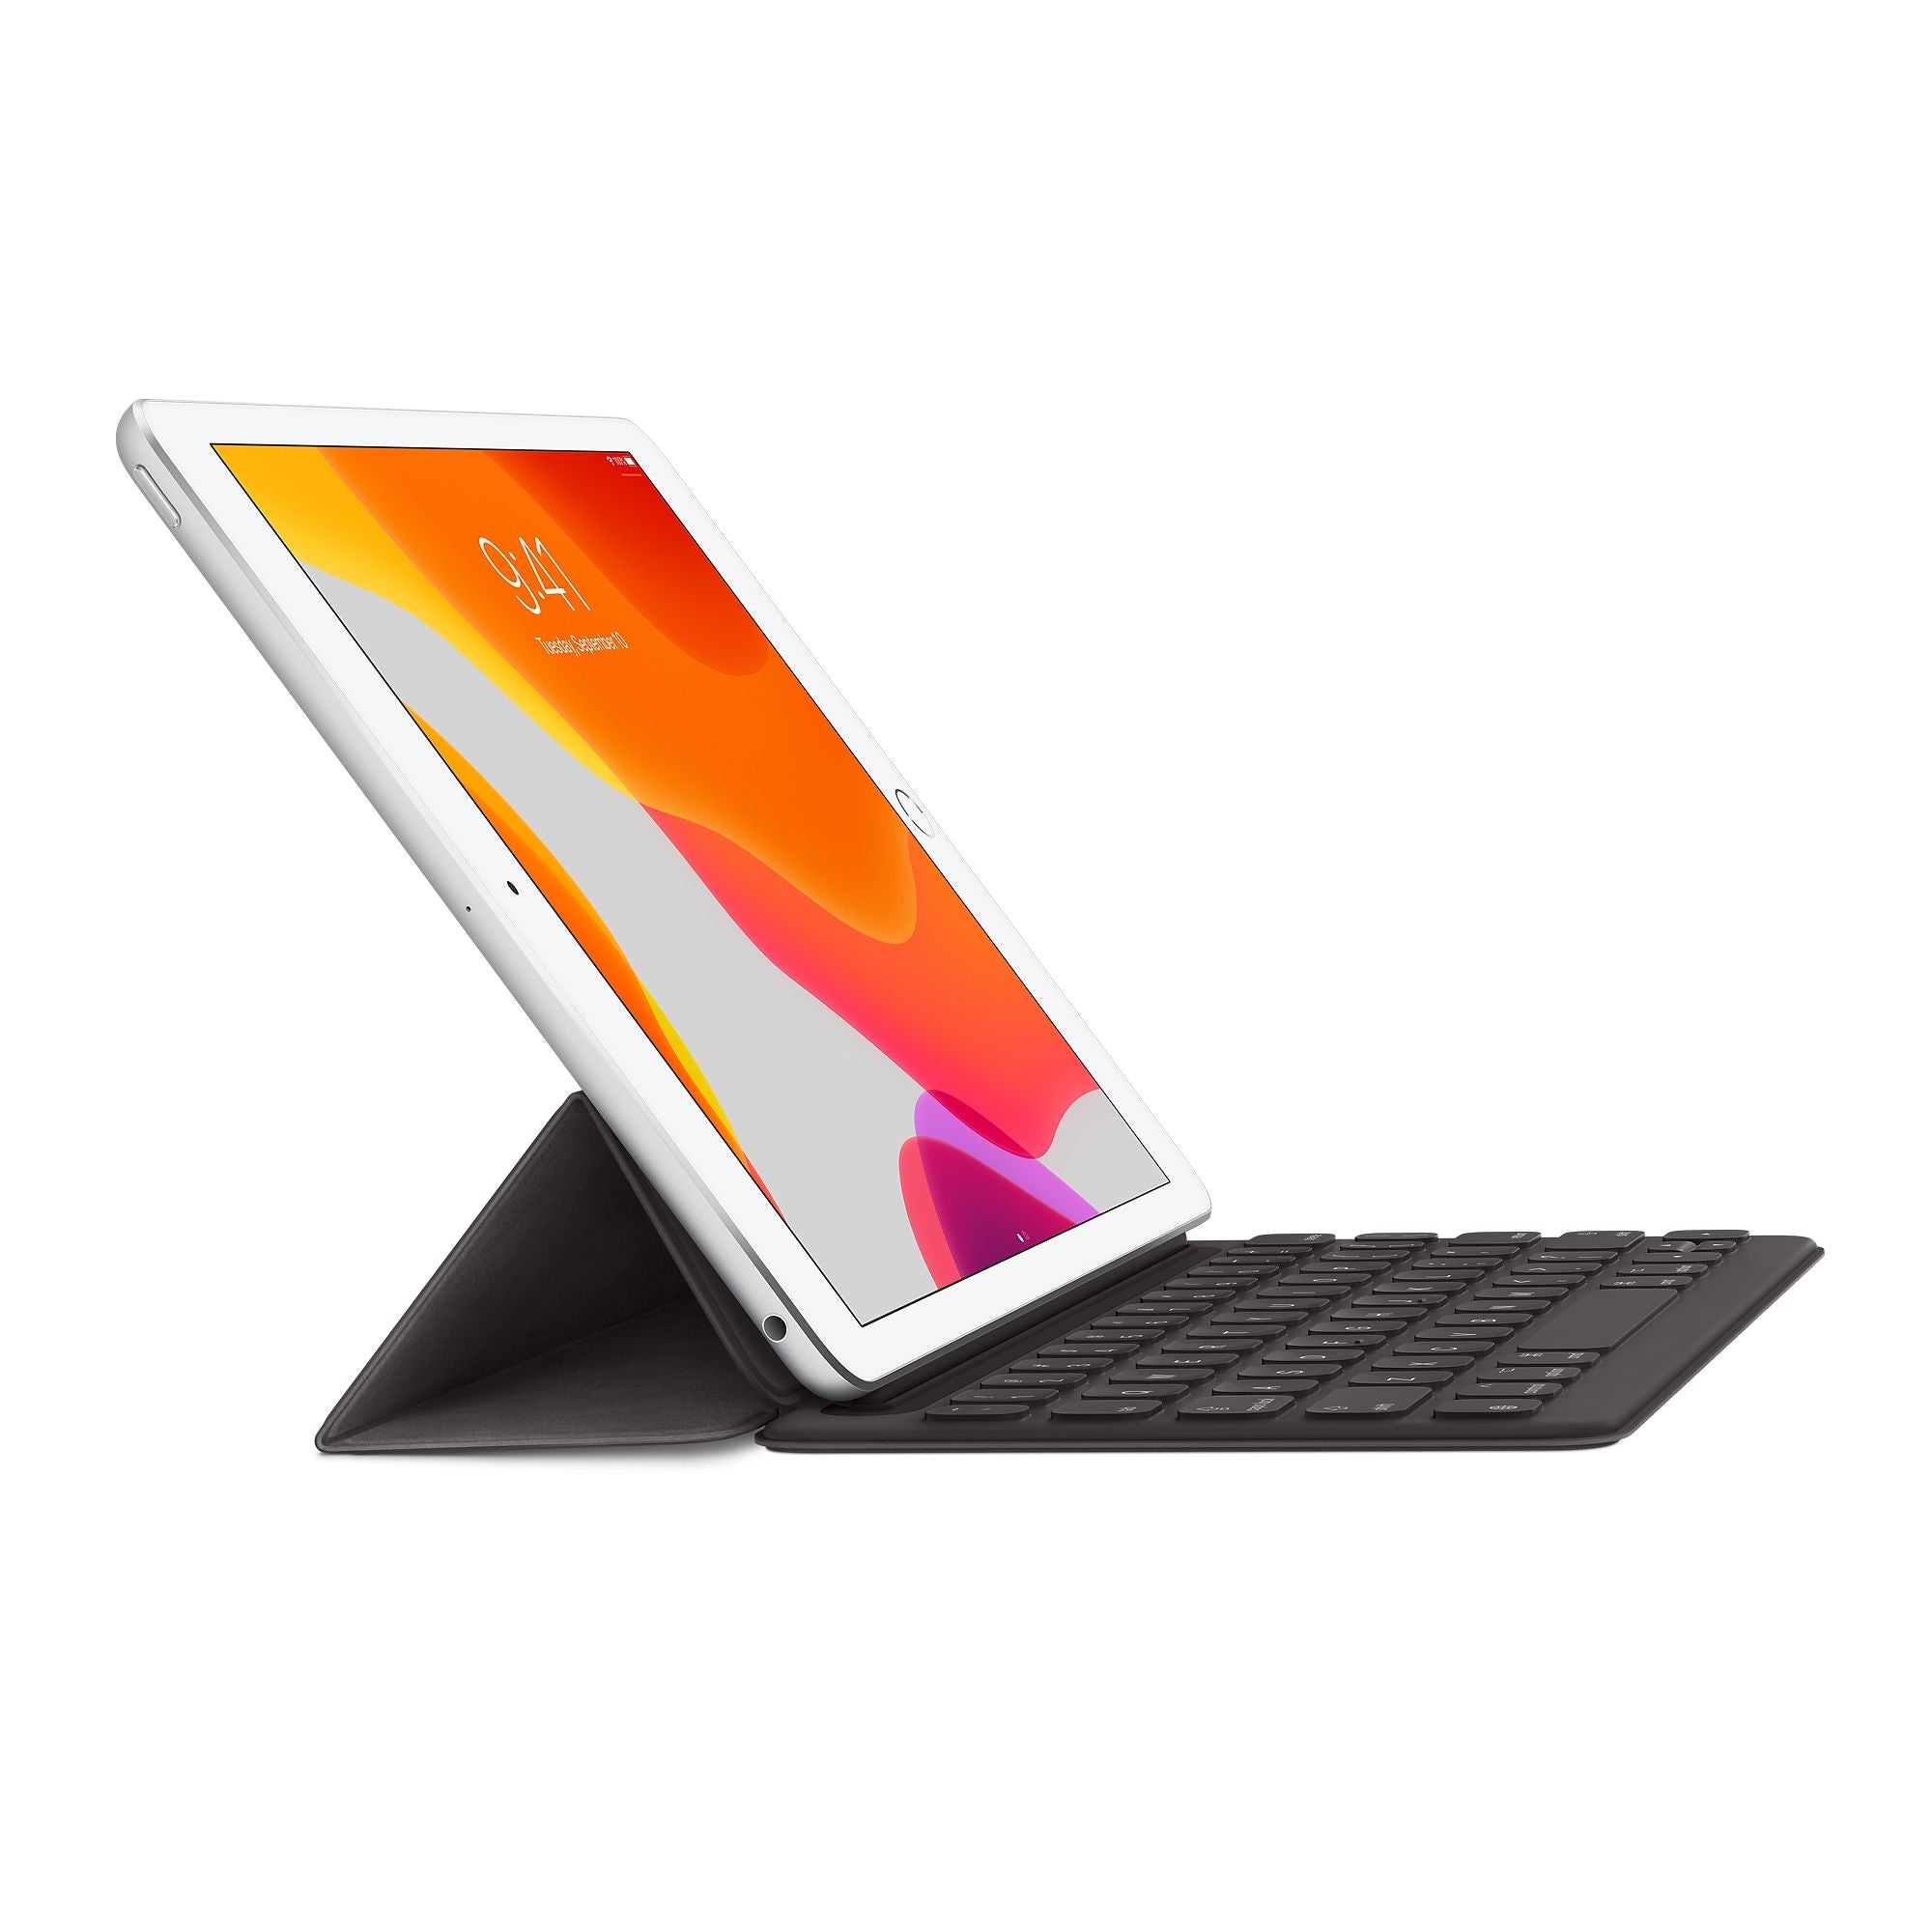 Smart Keyboard for iPad (7th, 8th, 9th generation) and iPad Air (3rd generation)